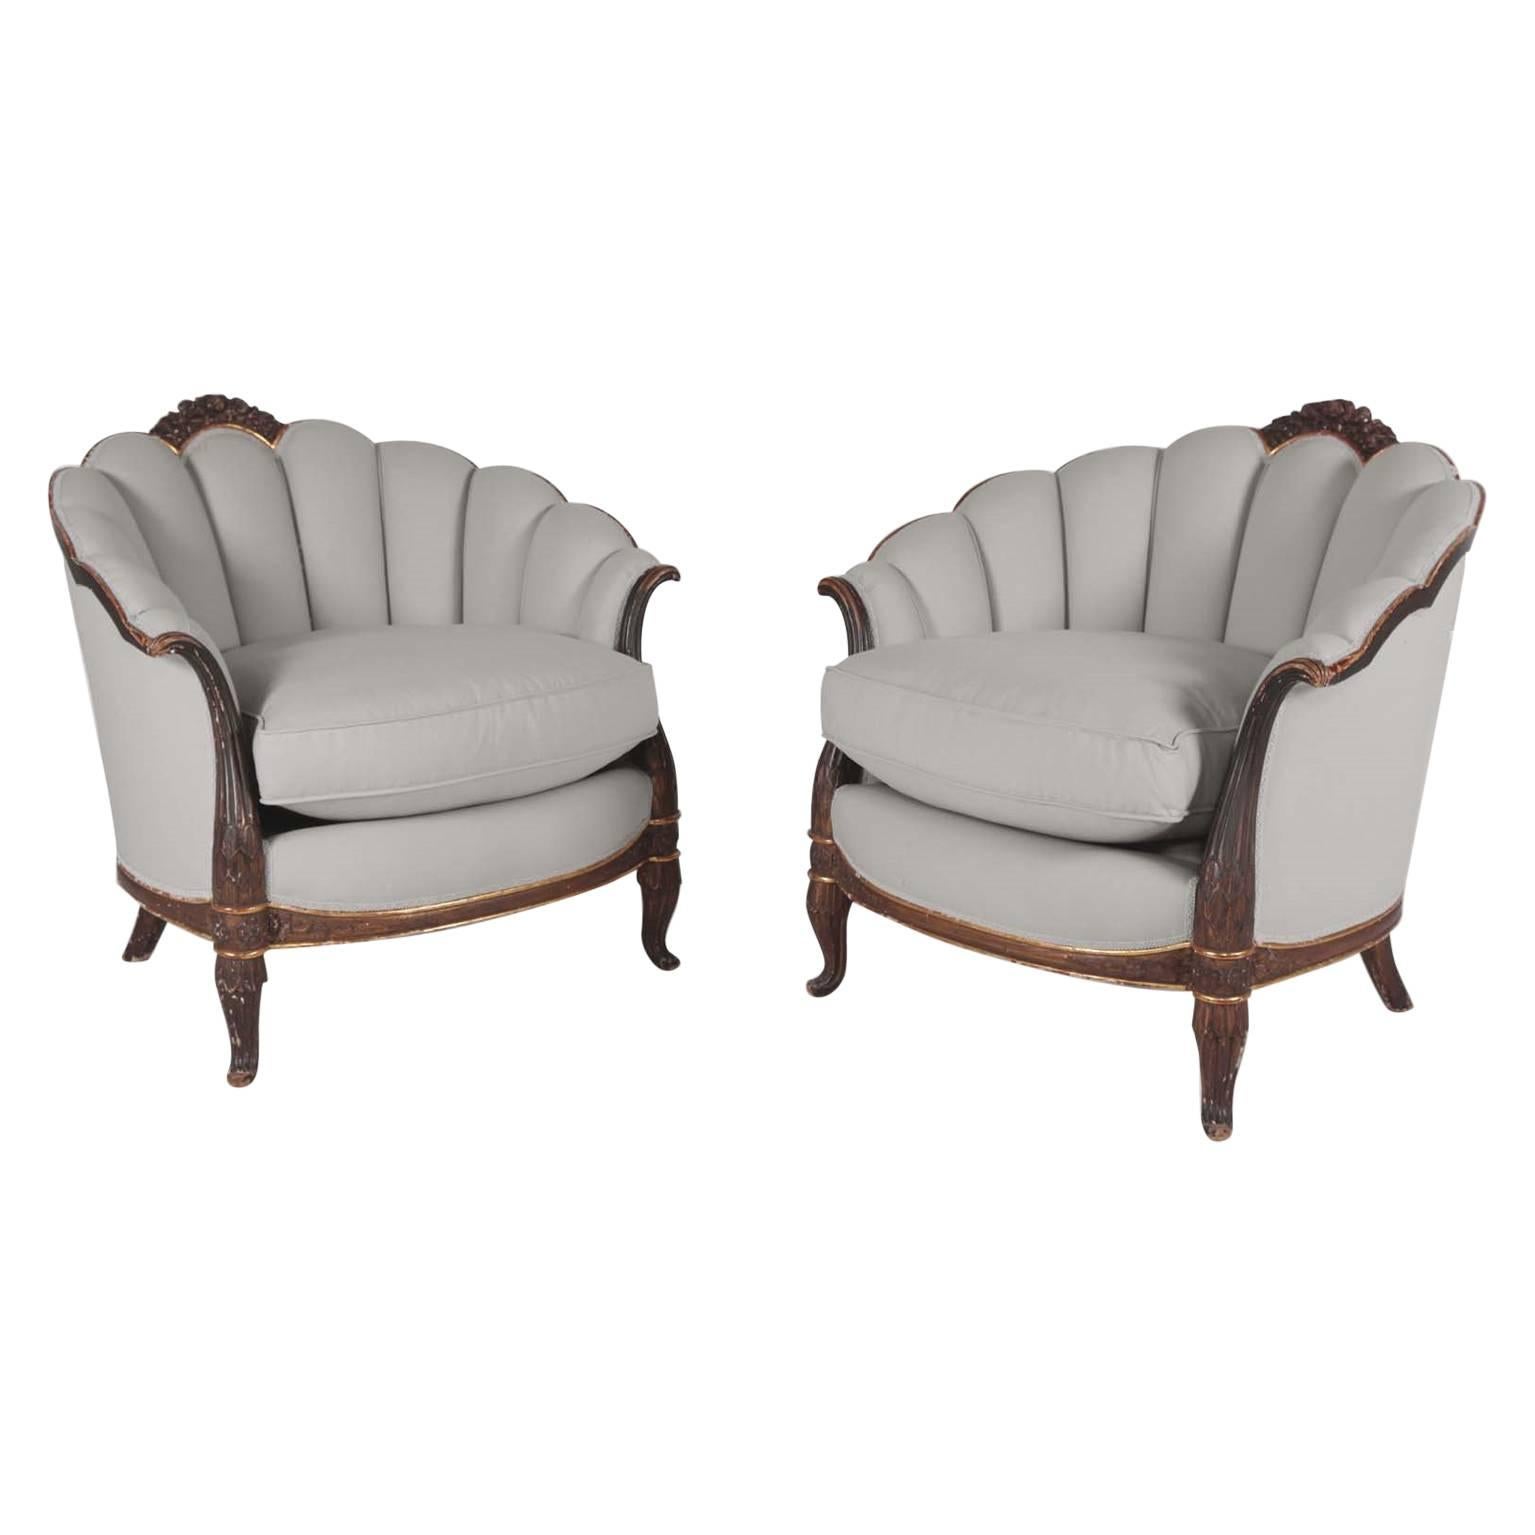 Beautiful Pair of 1925 French Armchairs Designed by Maurice Dufrène